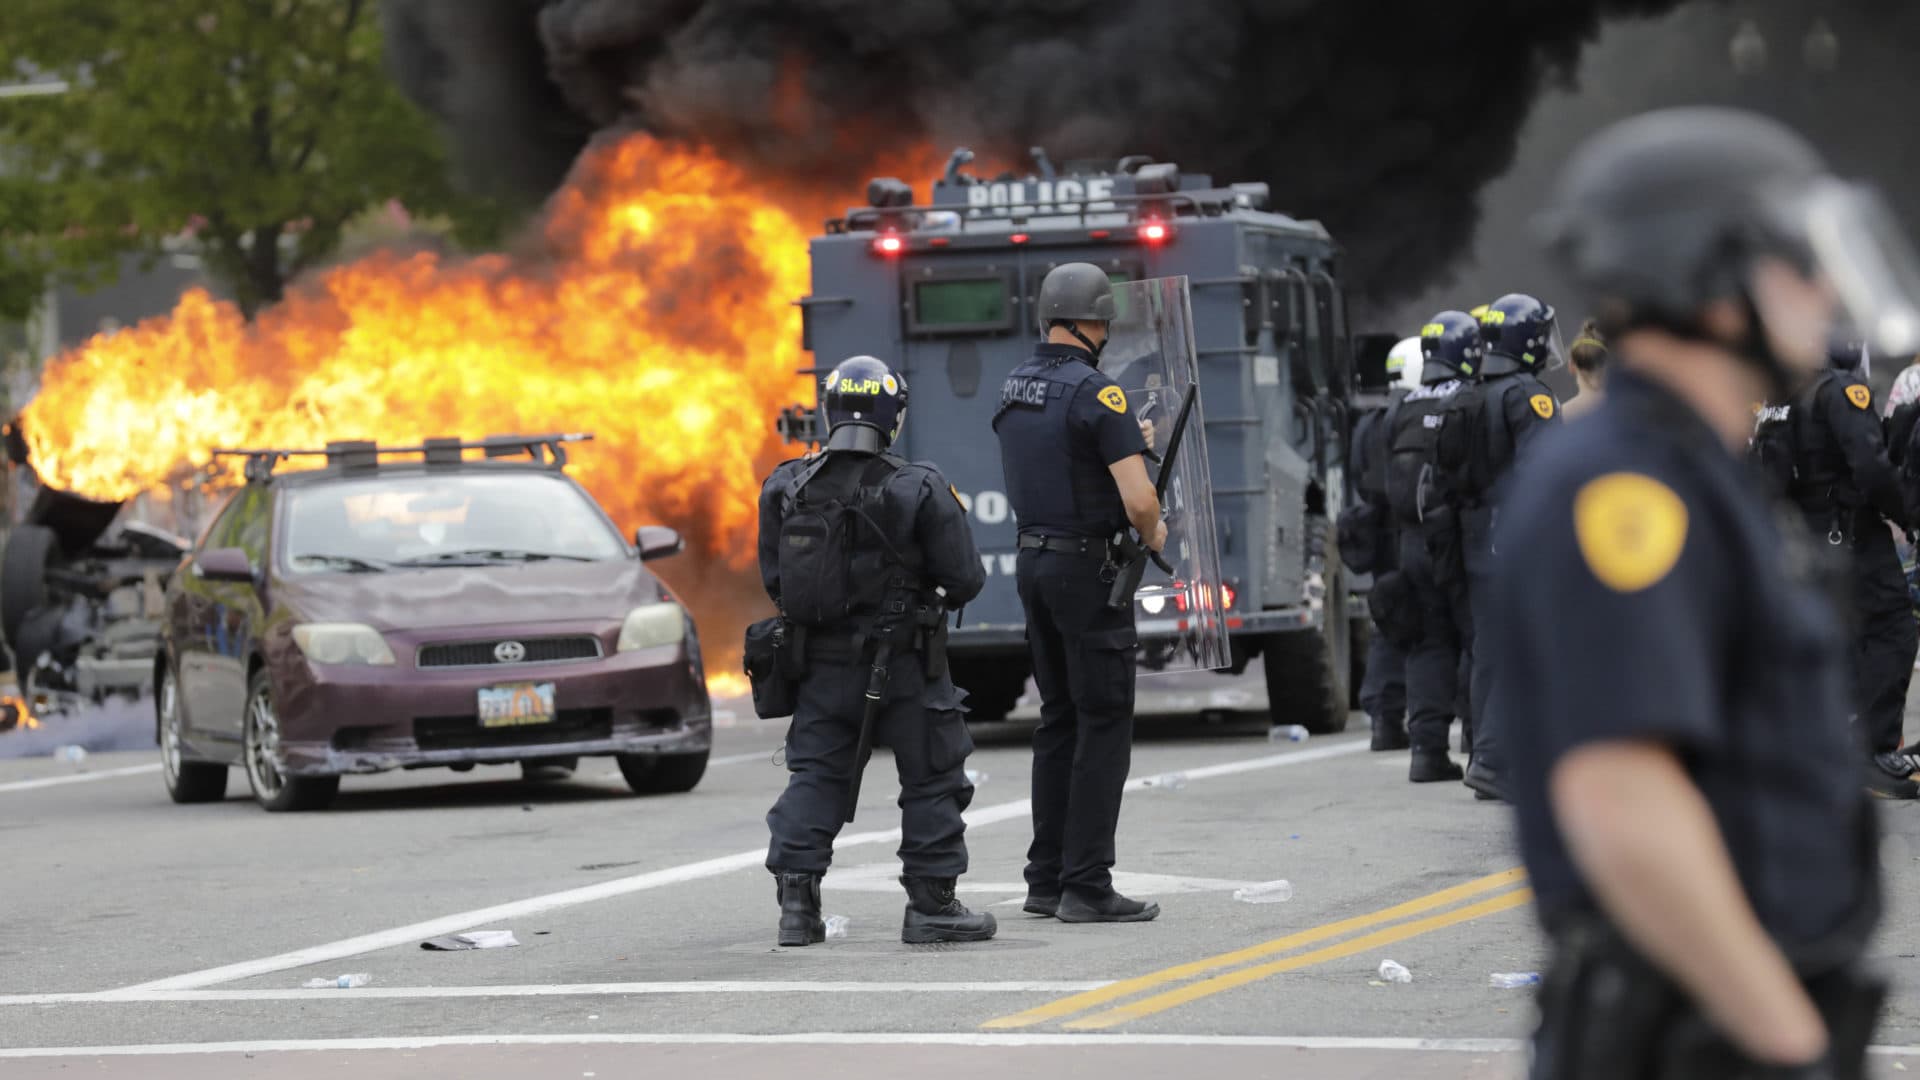 Policemen watch as a vehicle burns as protesters demonstrate Saturday, May 30, 2020, in Salt Lake City. Thousands of people converged on downtown Salt Lake City on Saturday to protest the death of George Floyd in Minneapolis, and some demonstrators set fire to a police car and threw eggs and wrote graffiti on a police station. (AP Photo/Rick Bowmer)